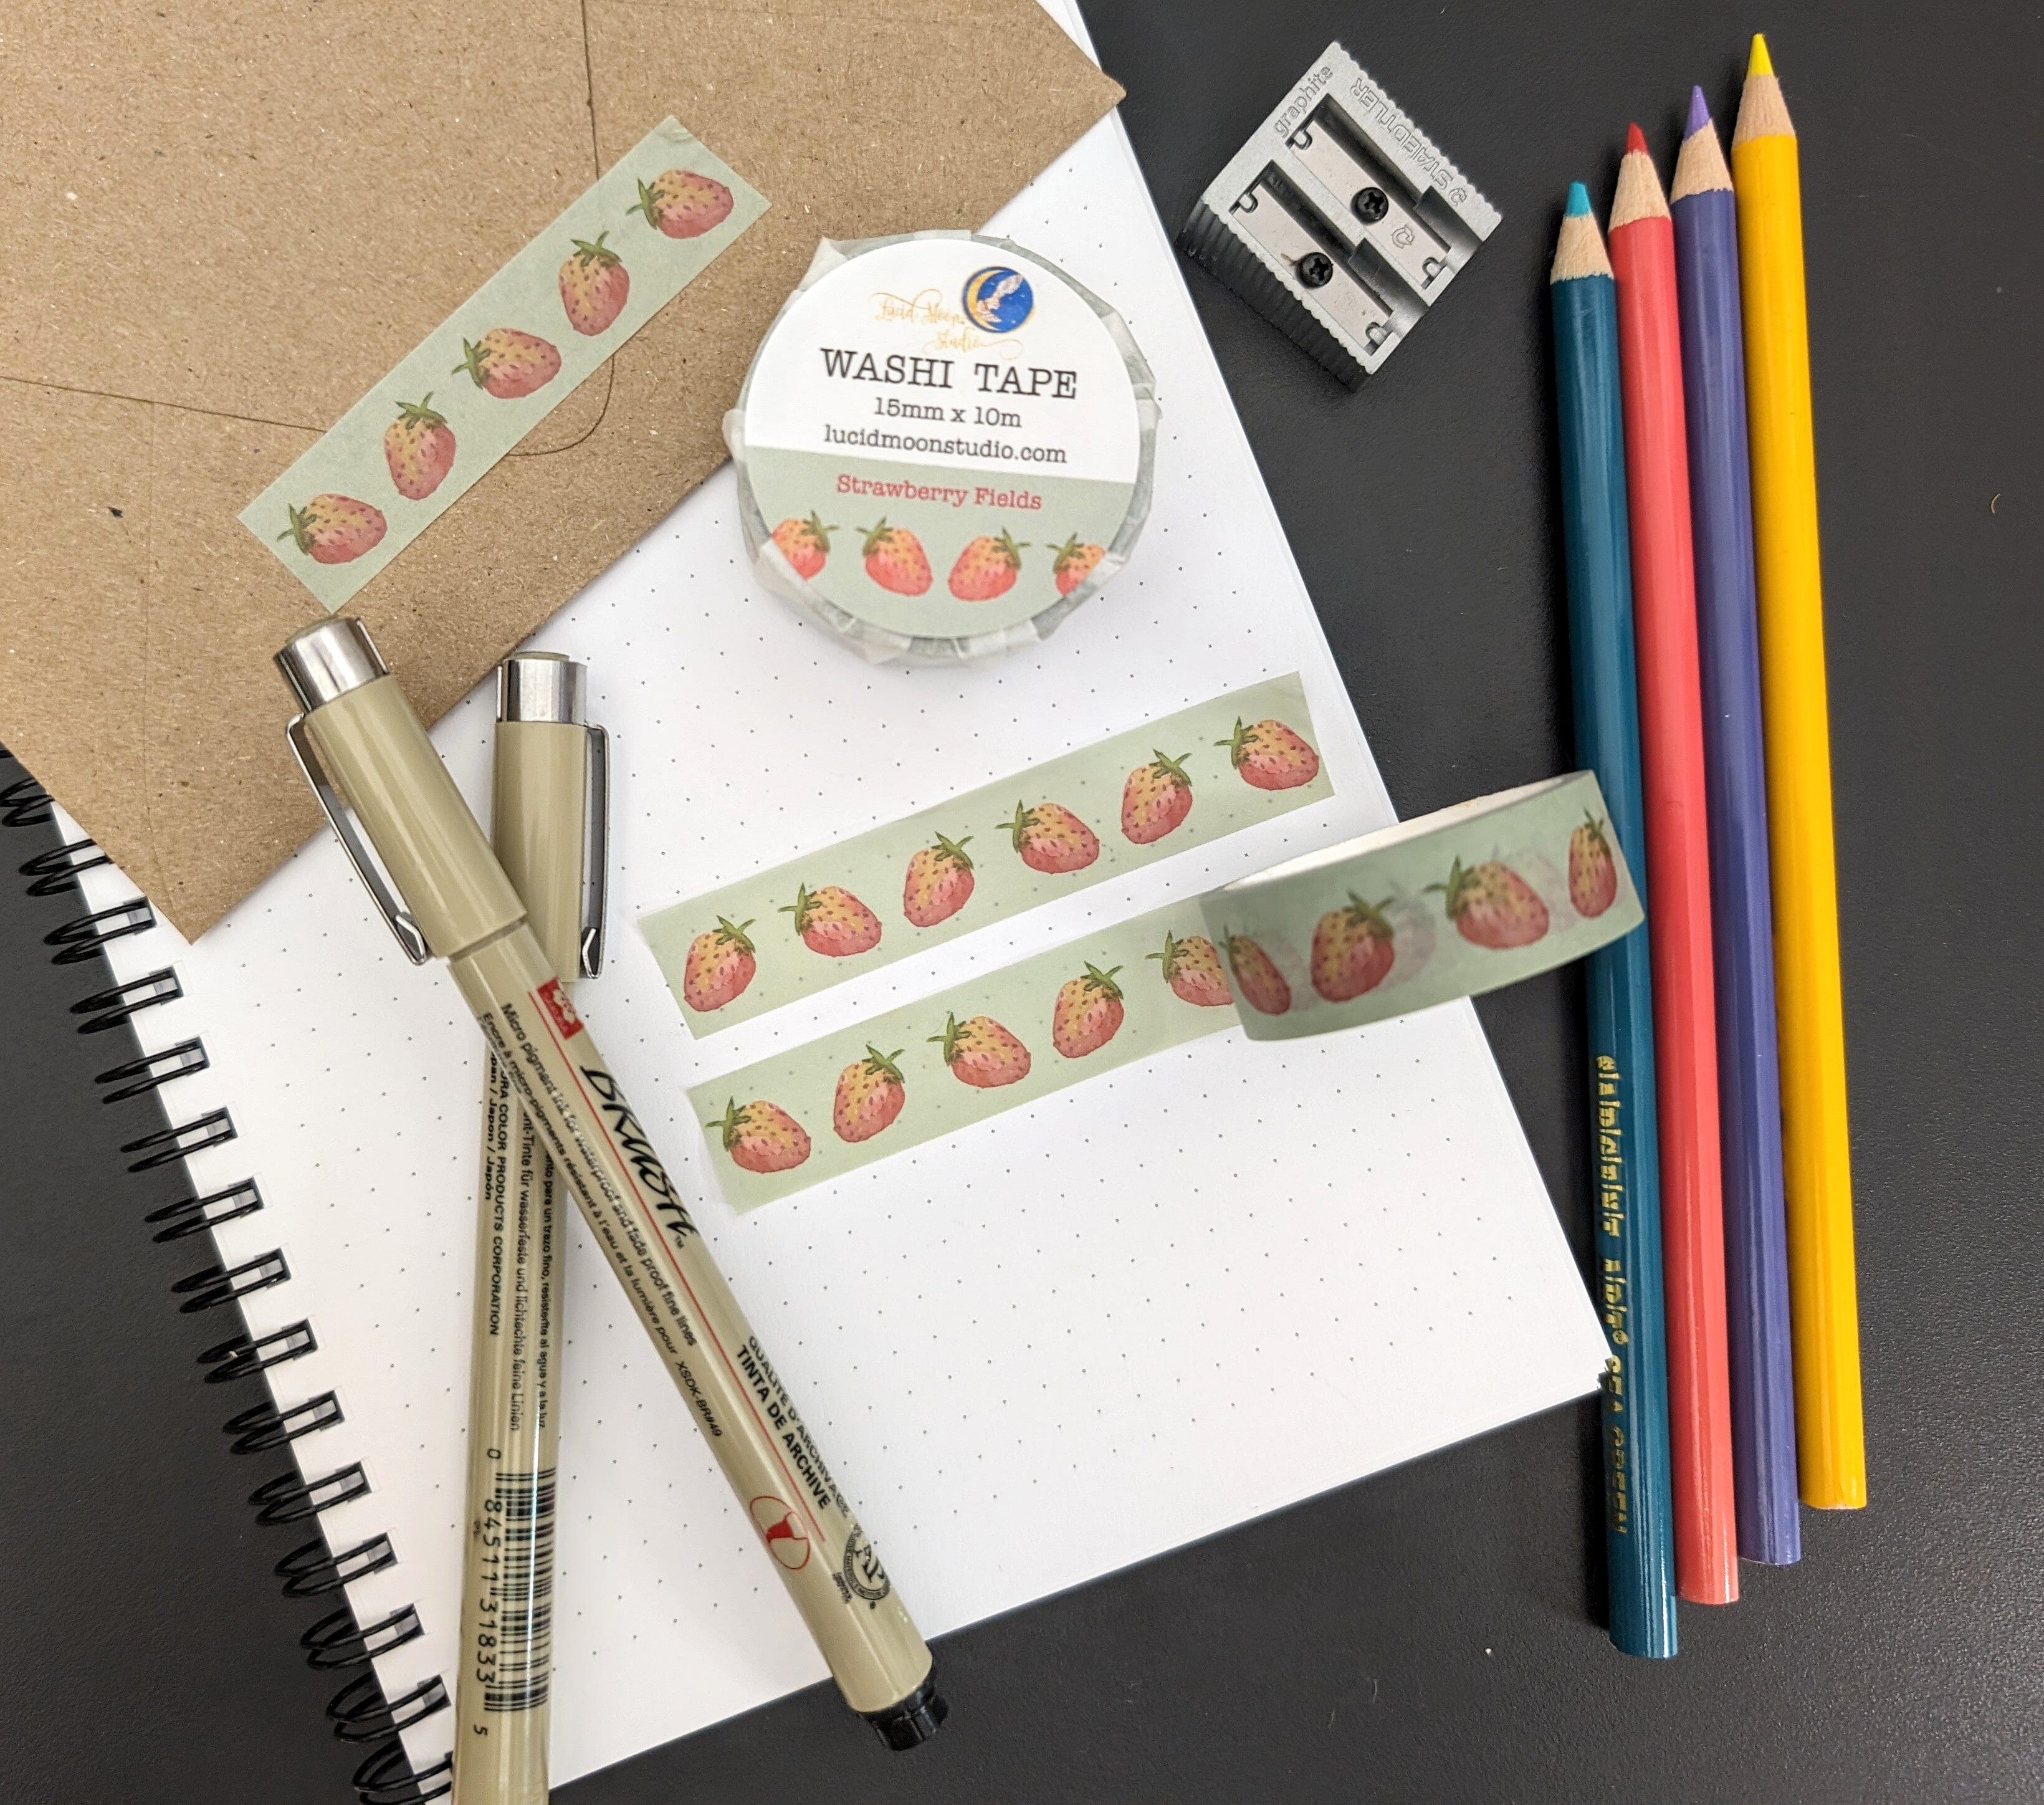 A roll of Strawberry Fields washi tape in a paper wrapper and 2 strips of the washi tape on a dot grid notebook and kraft envelope along with pens, colored pencils, and a pencil sharpener.